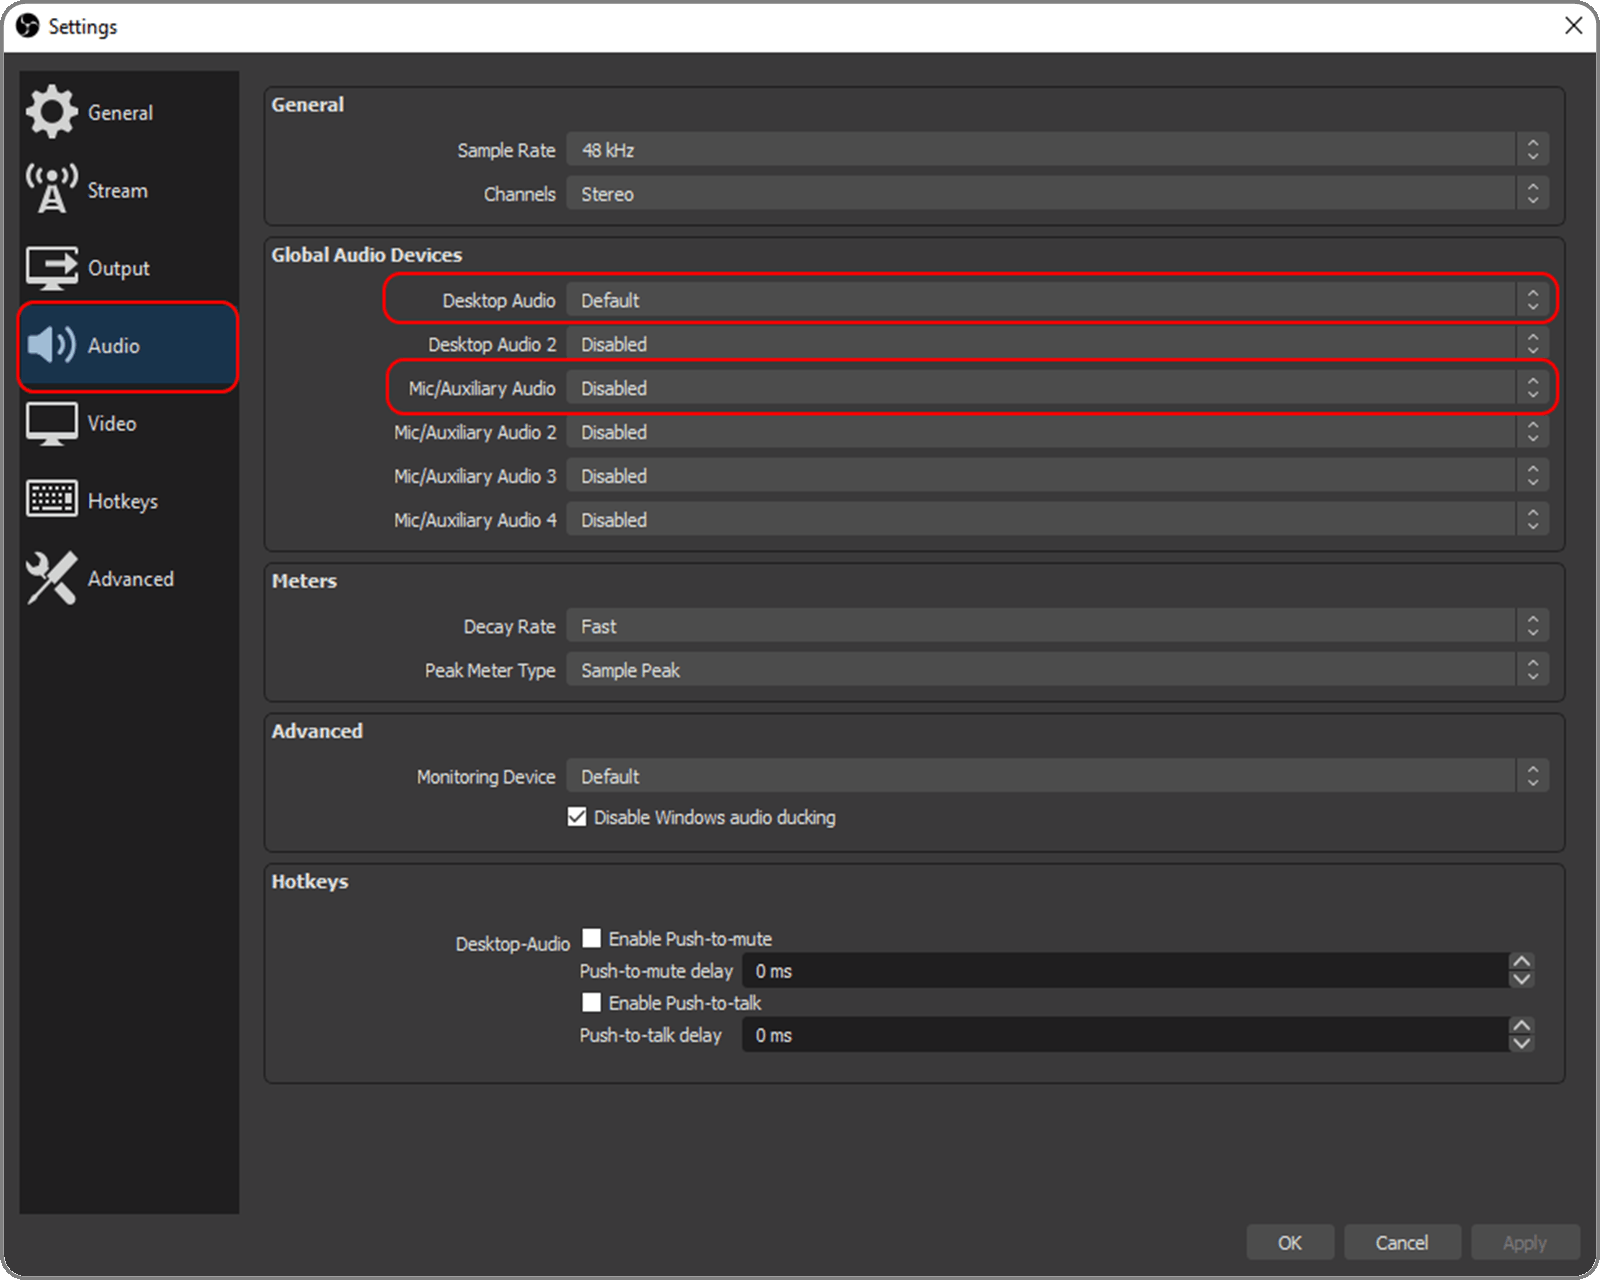 obs_04_settings_audio.png